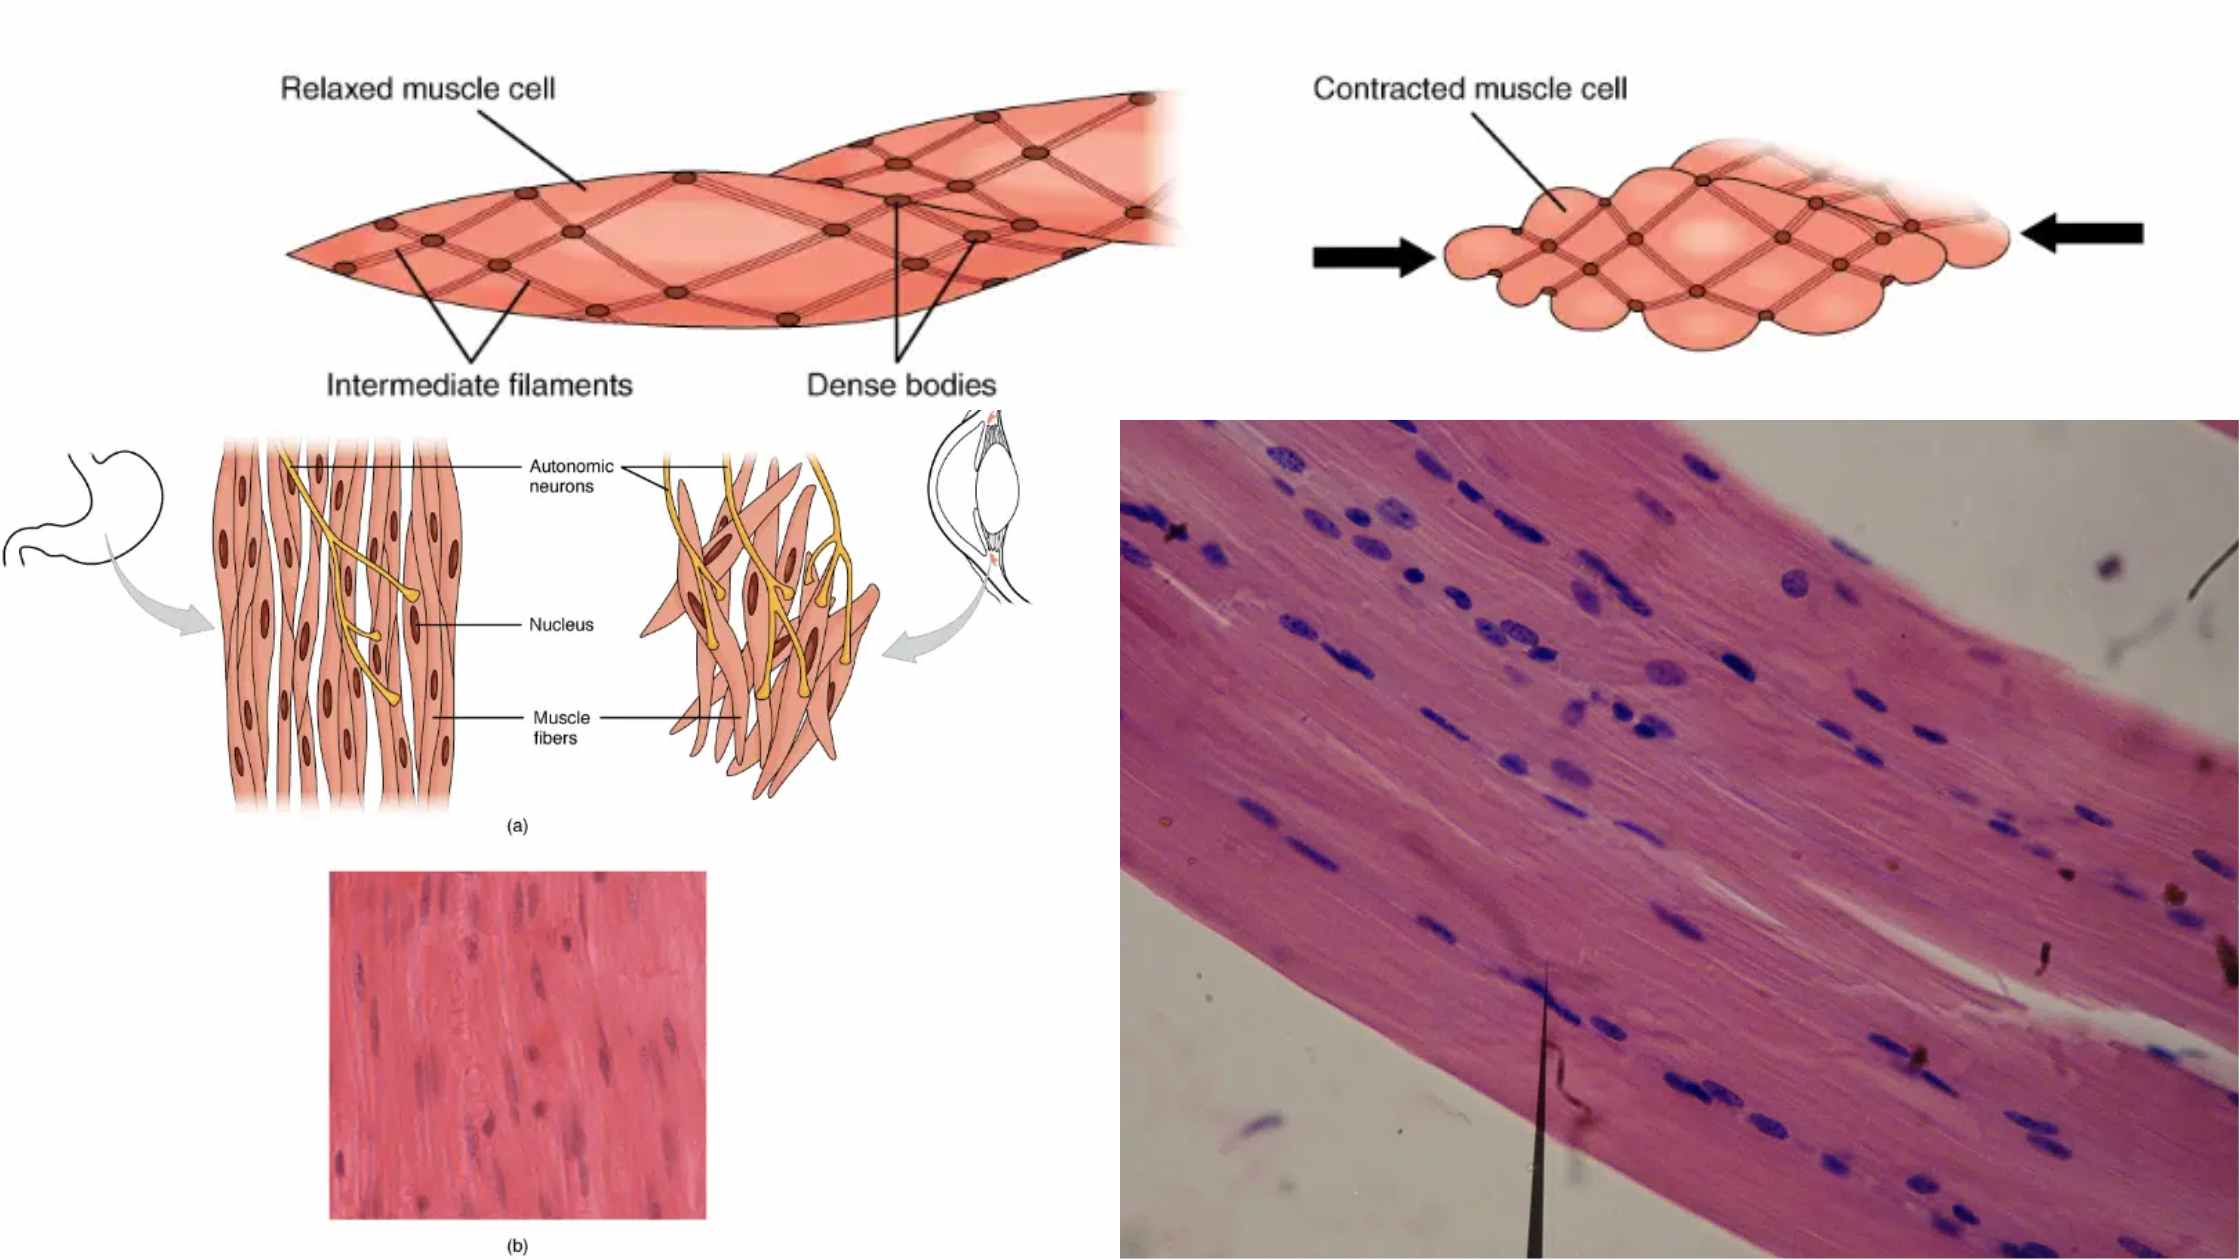 Smooth Muscle - Definition, Structure, Mechanism, Functions